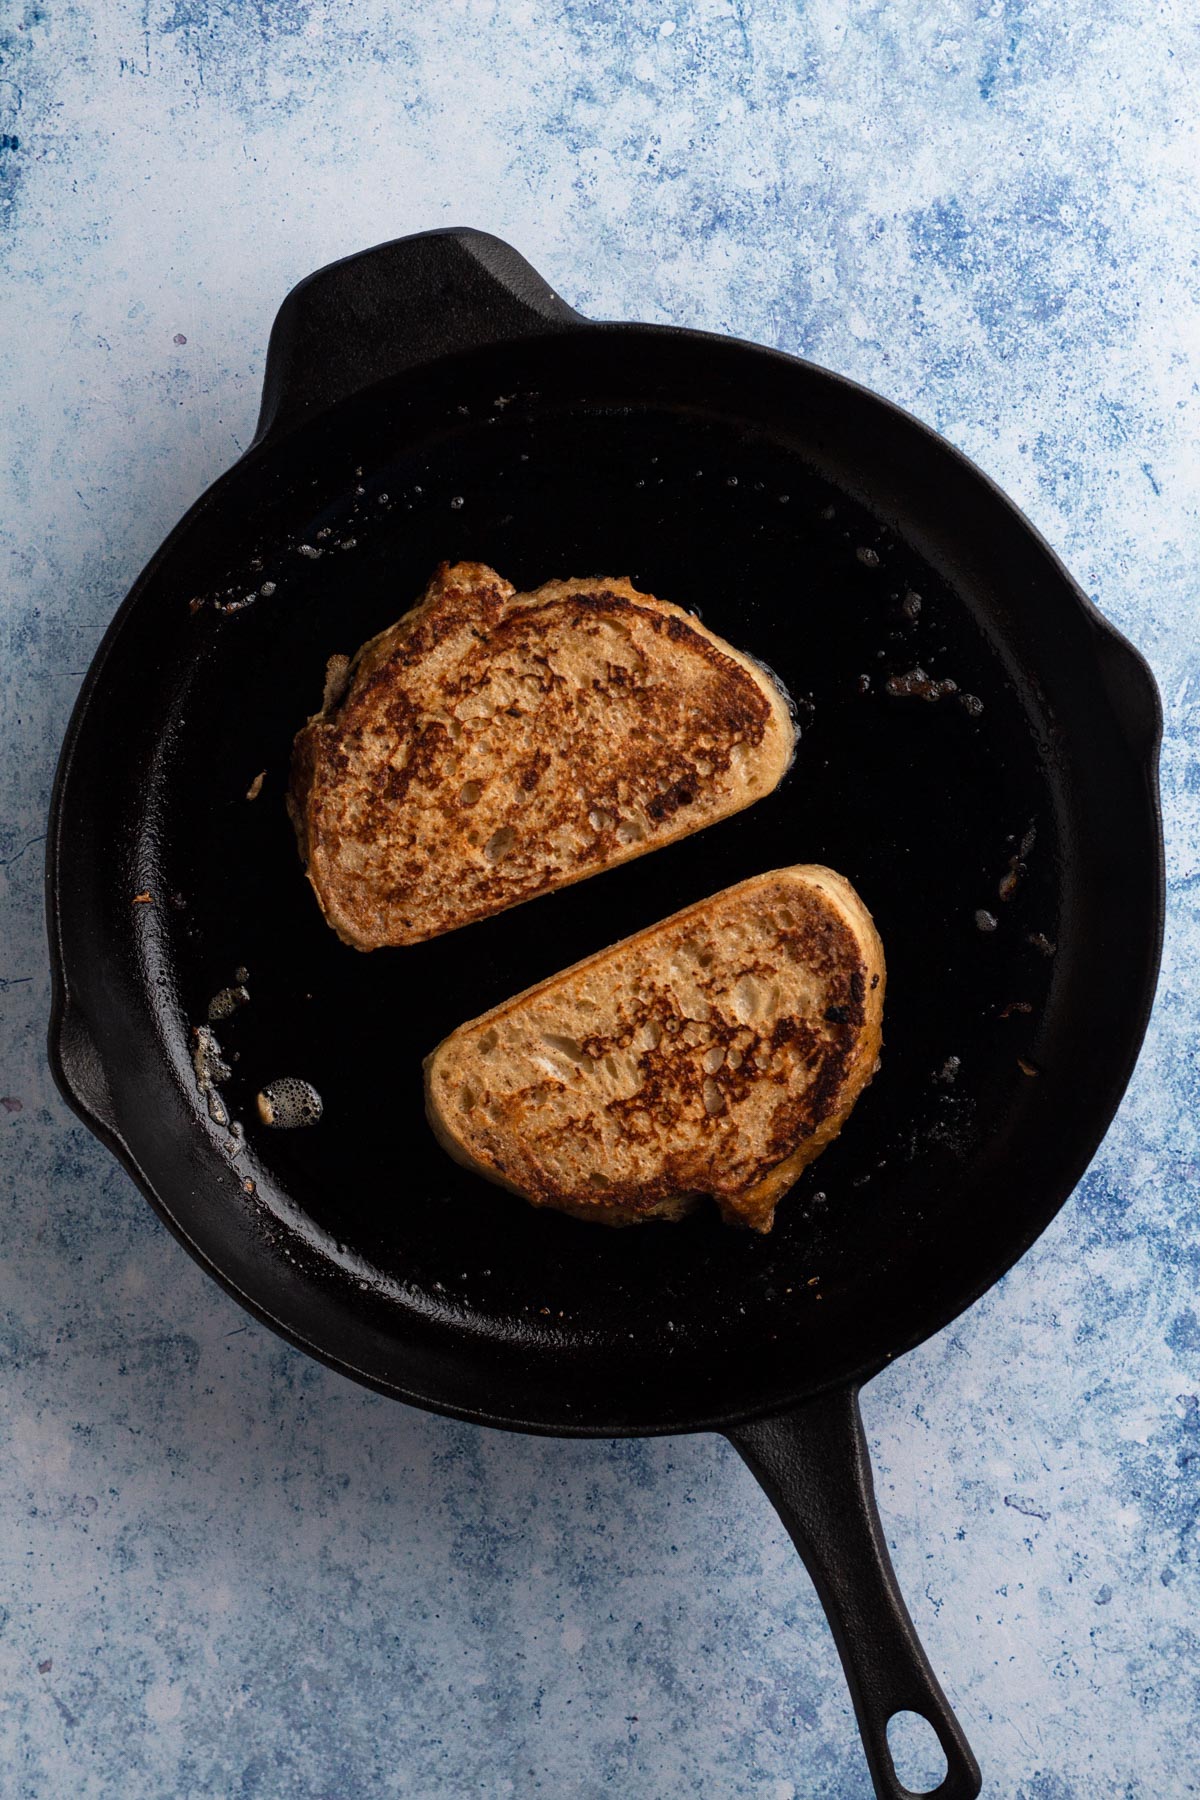 Golden brown slices of French toast in a cast iron skillet.